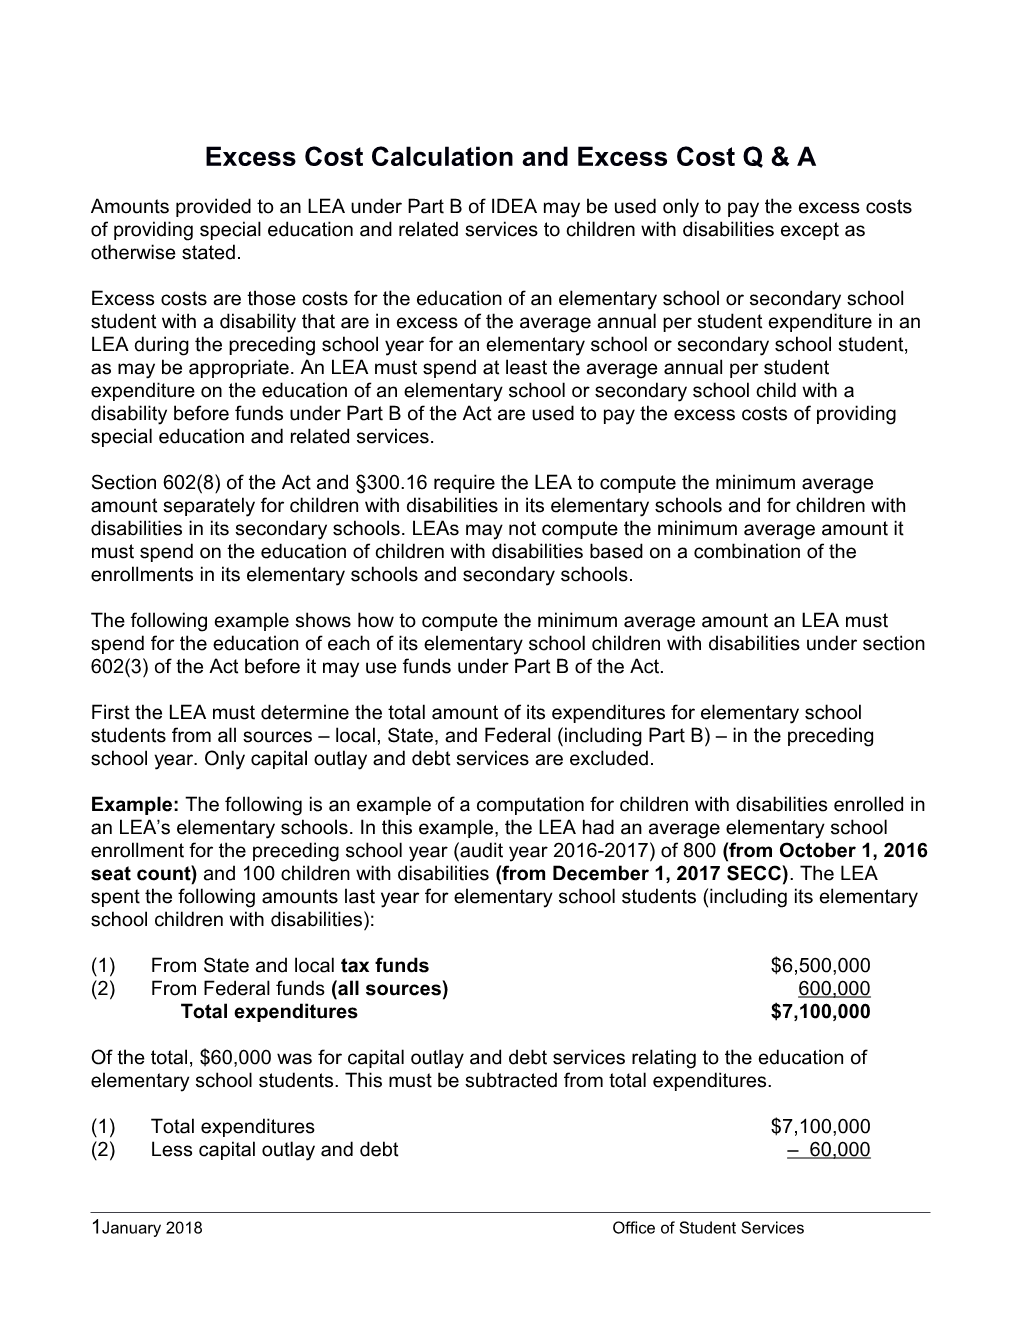 Excess Costs Calculation and Excess Cost Q &A